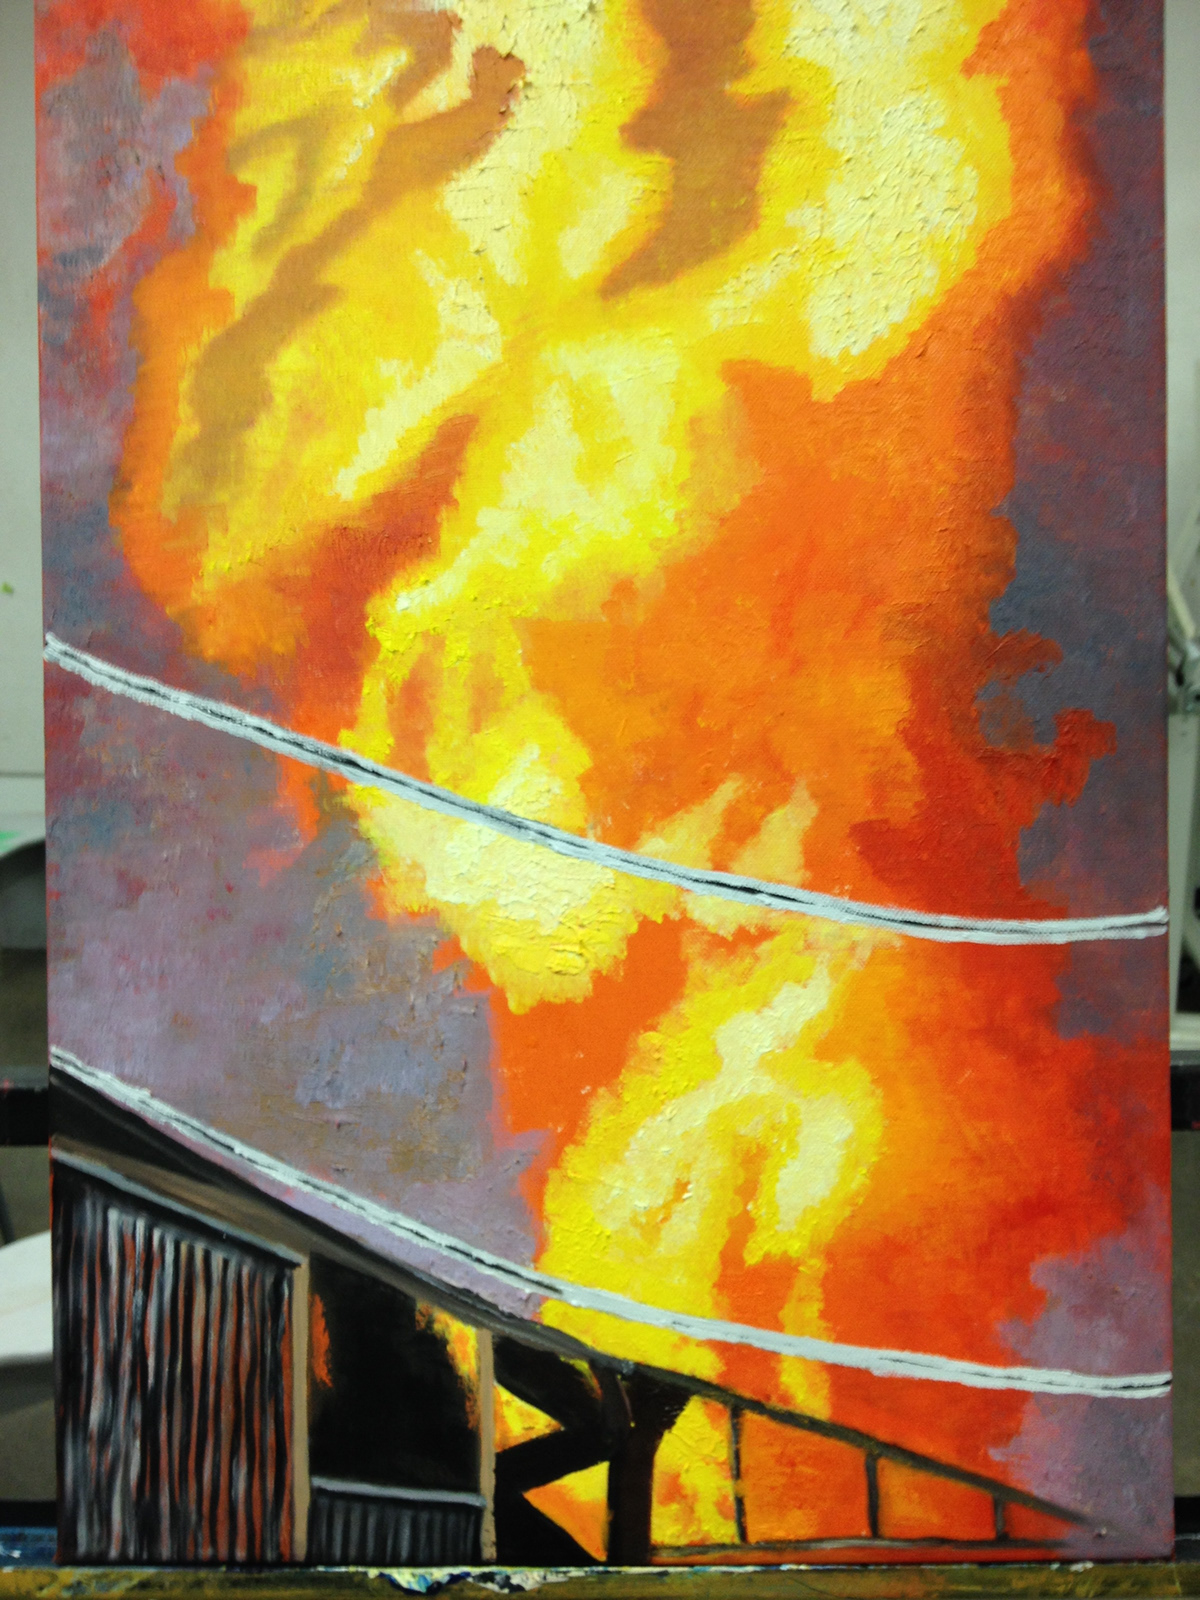 fire Oil Painting Sun burning building electrical pole smoke abstract